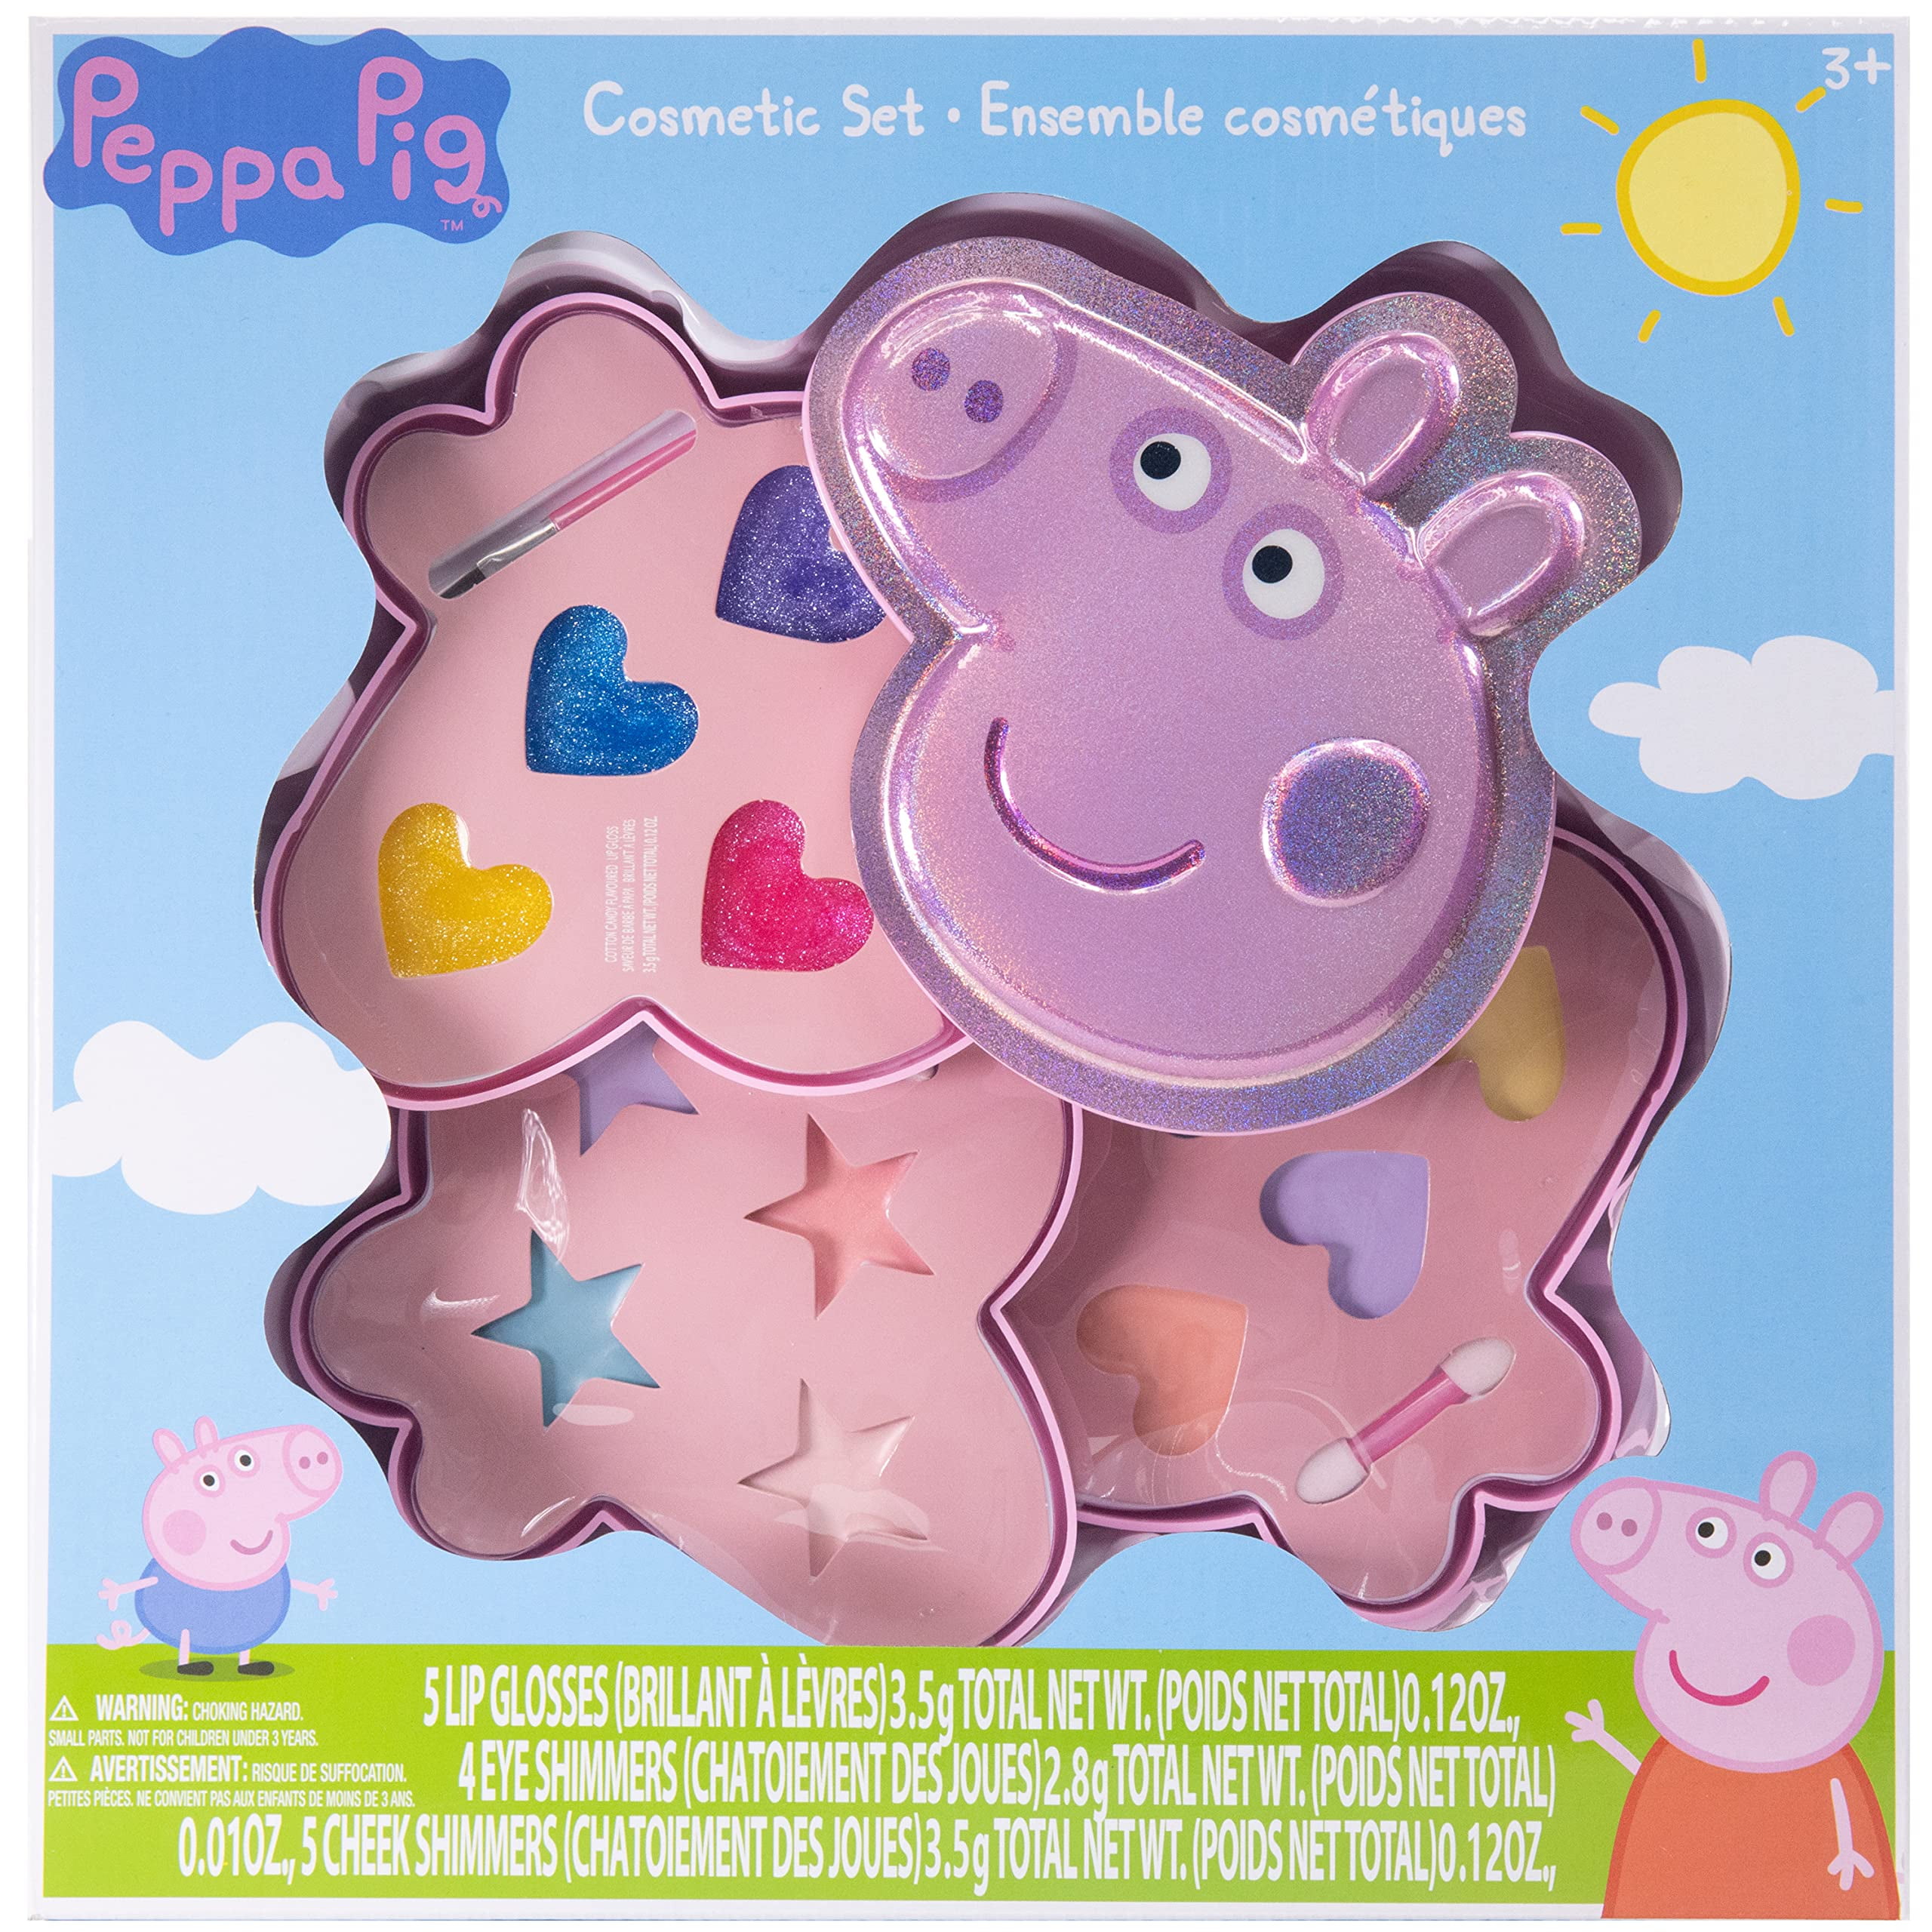 Peppa Pig - Townley Girl Backpack Cosmetic Makeup Gift Bag Set include –  townleyShopnew